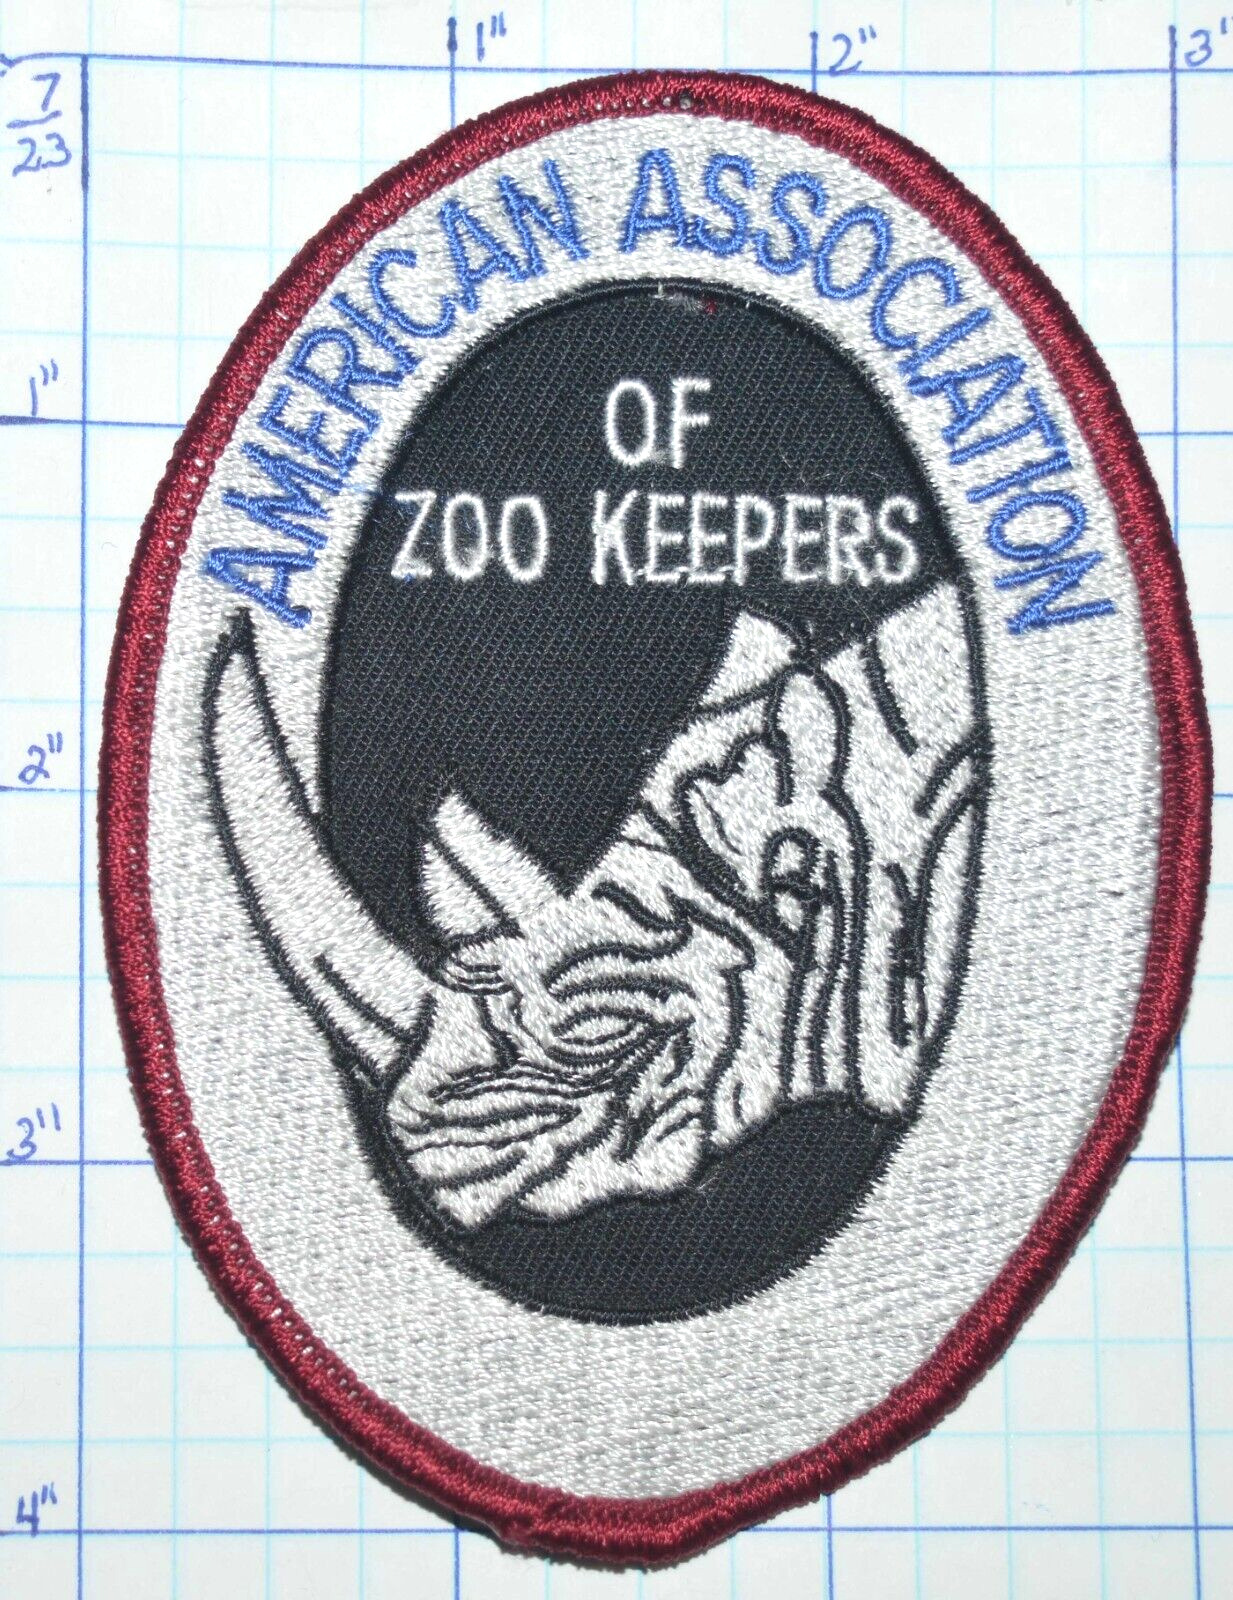 AMERICAN ASSOCIATION OF ZOO KEEPERS SOUVENIR PATCH